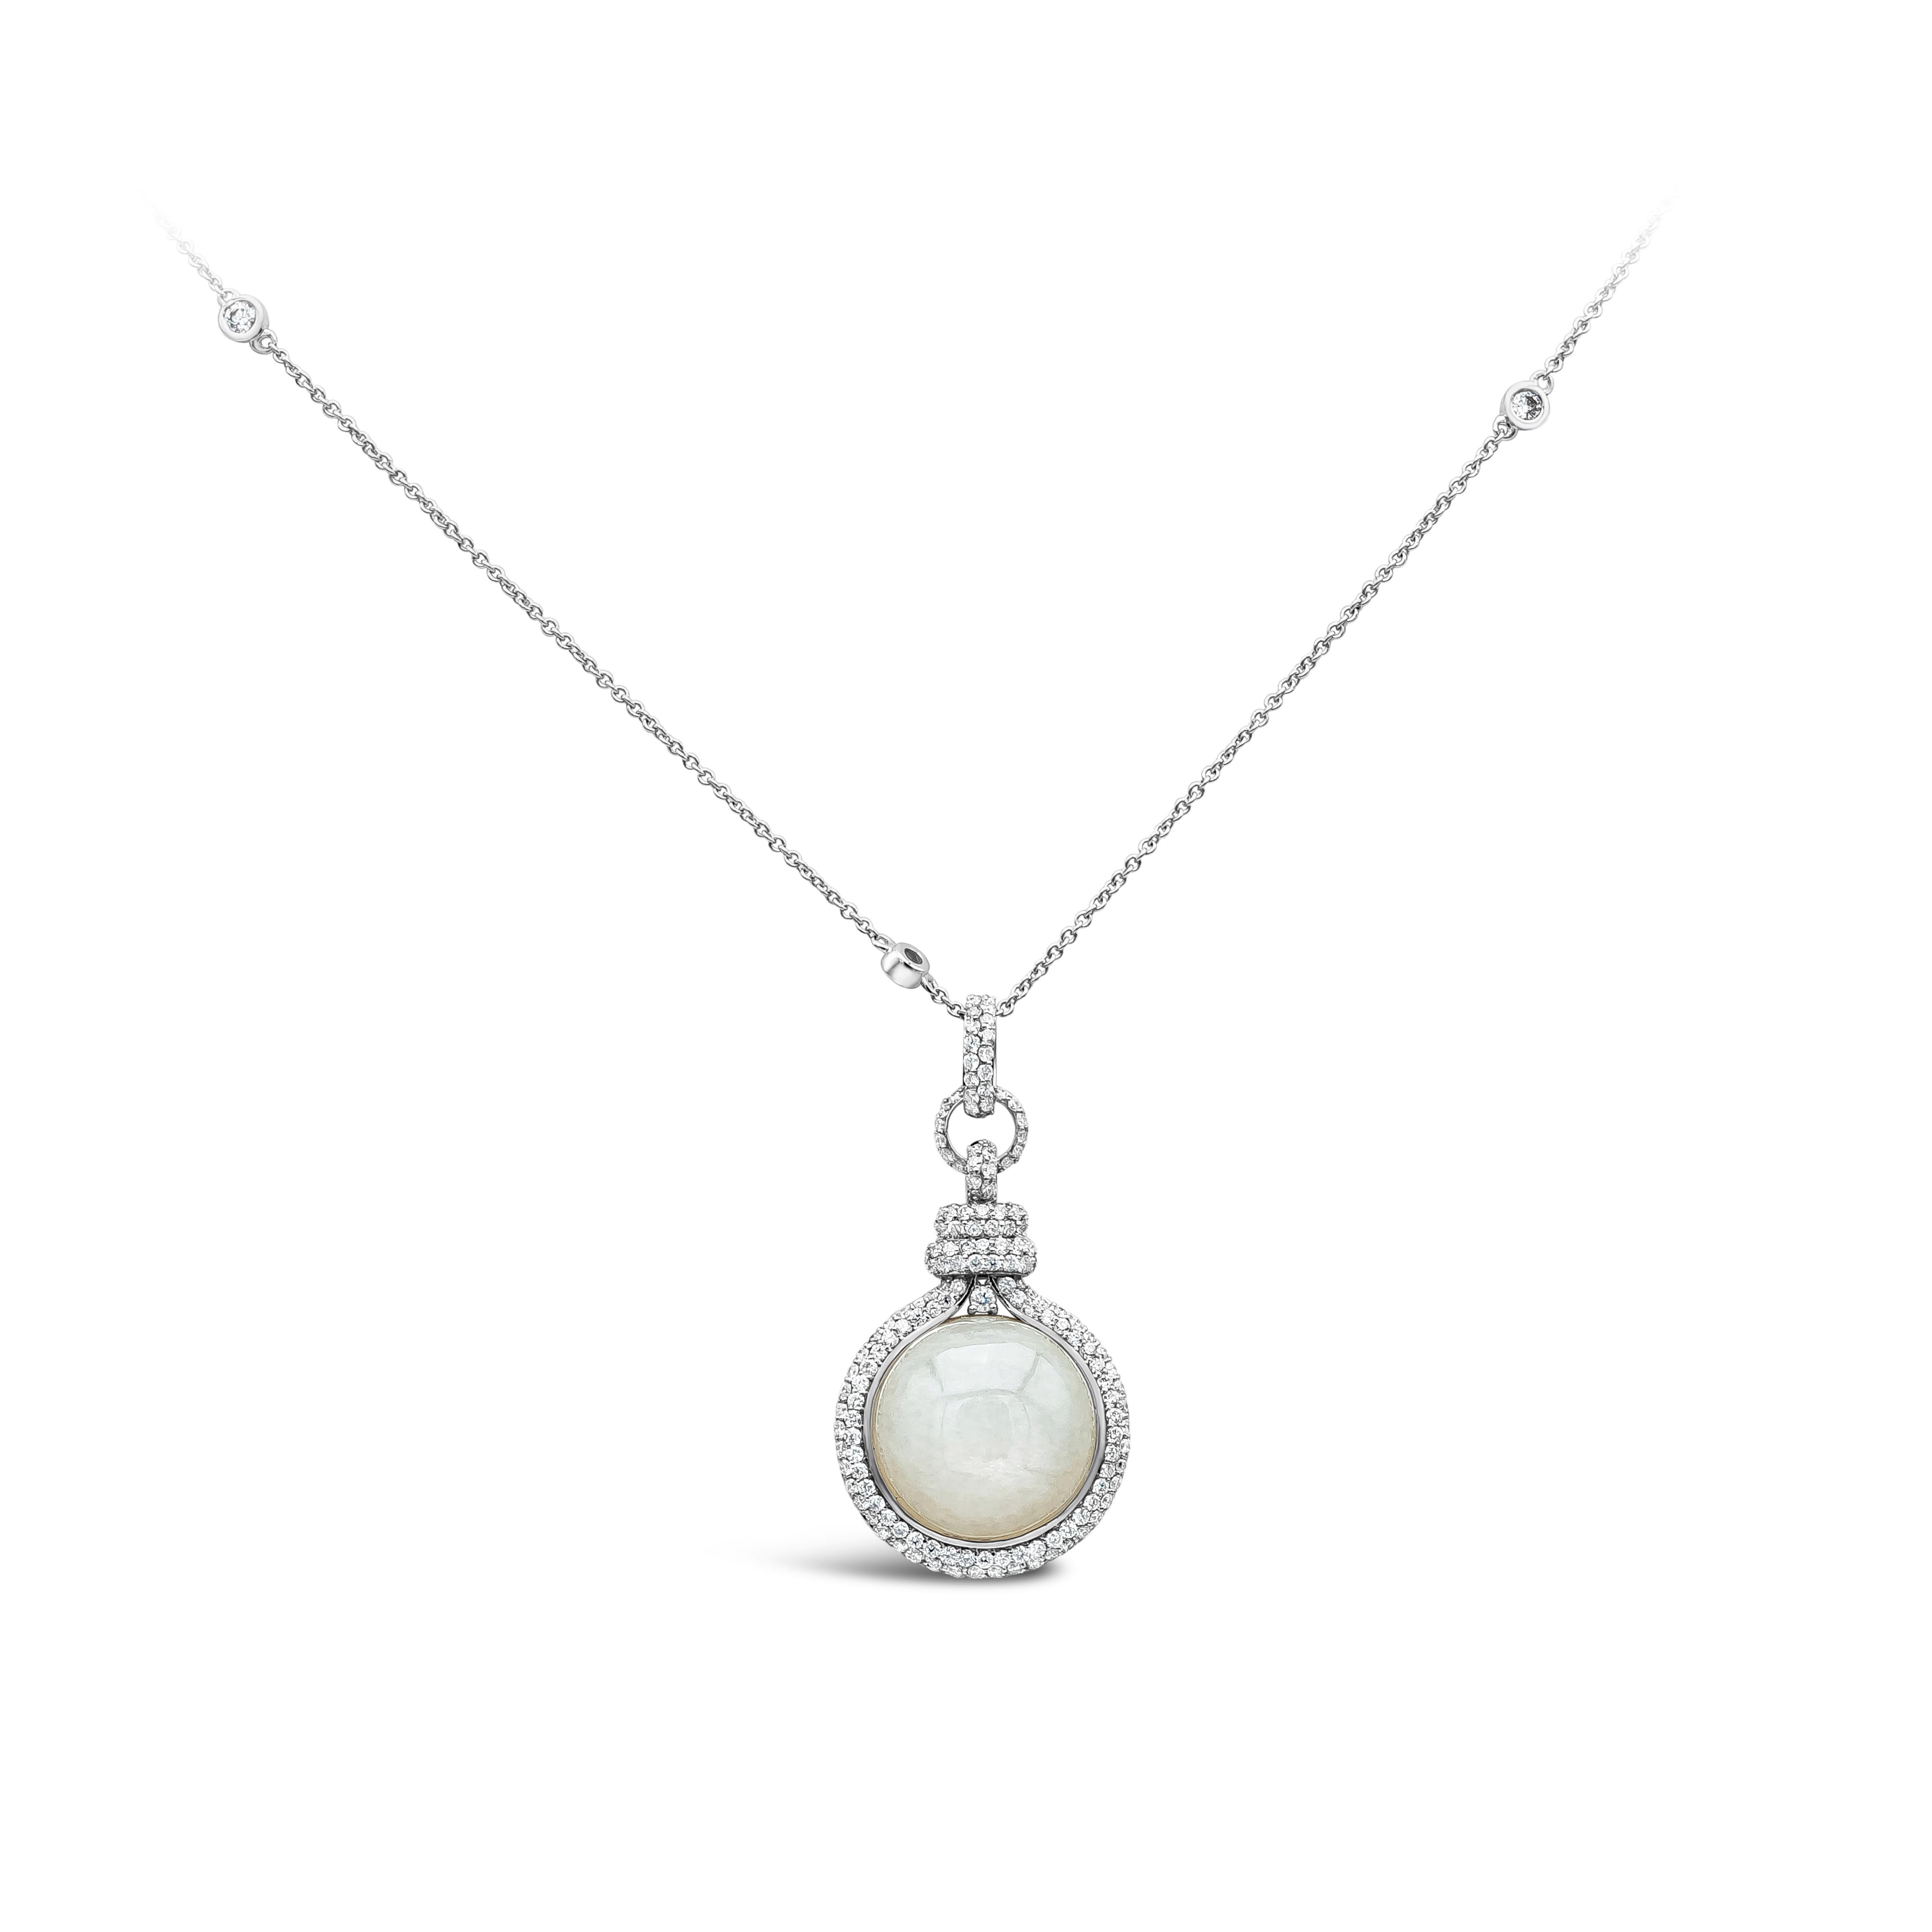 A fashionable pendant necklace showcasing a round white moonstone weighing 10.70 carat. Center stone is accented with bright round diamonds weighing 1.18 carats total, F color and VS clarity.
Made in 18 karats white gold.

Roman Malakov is a custom